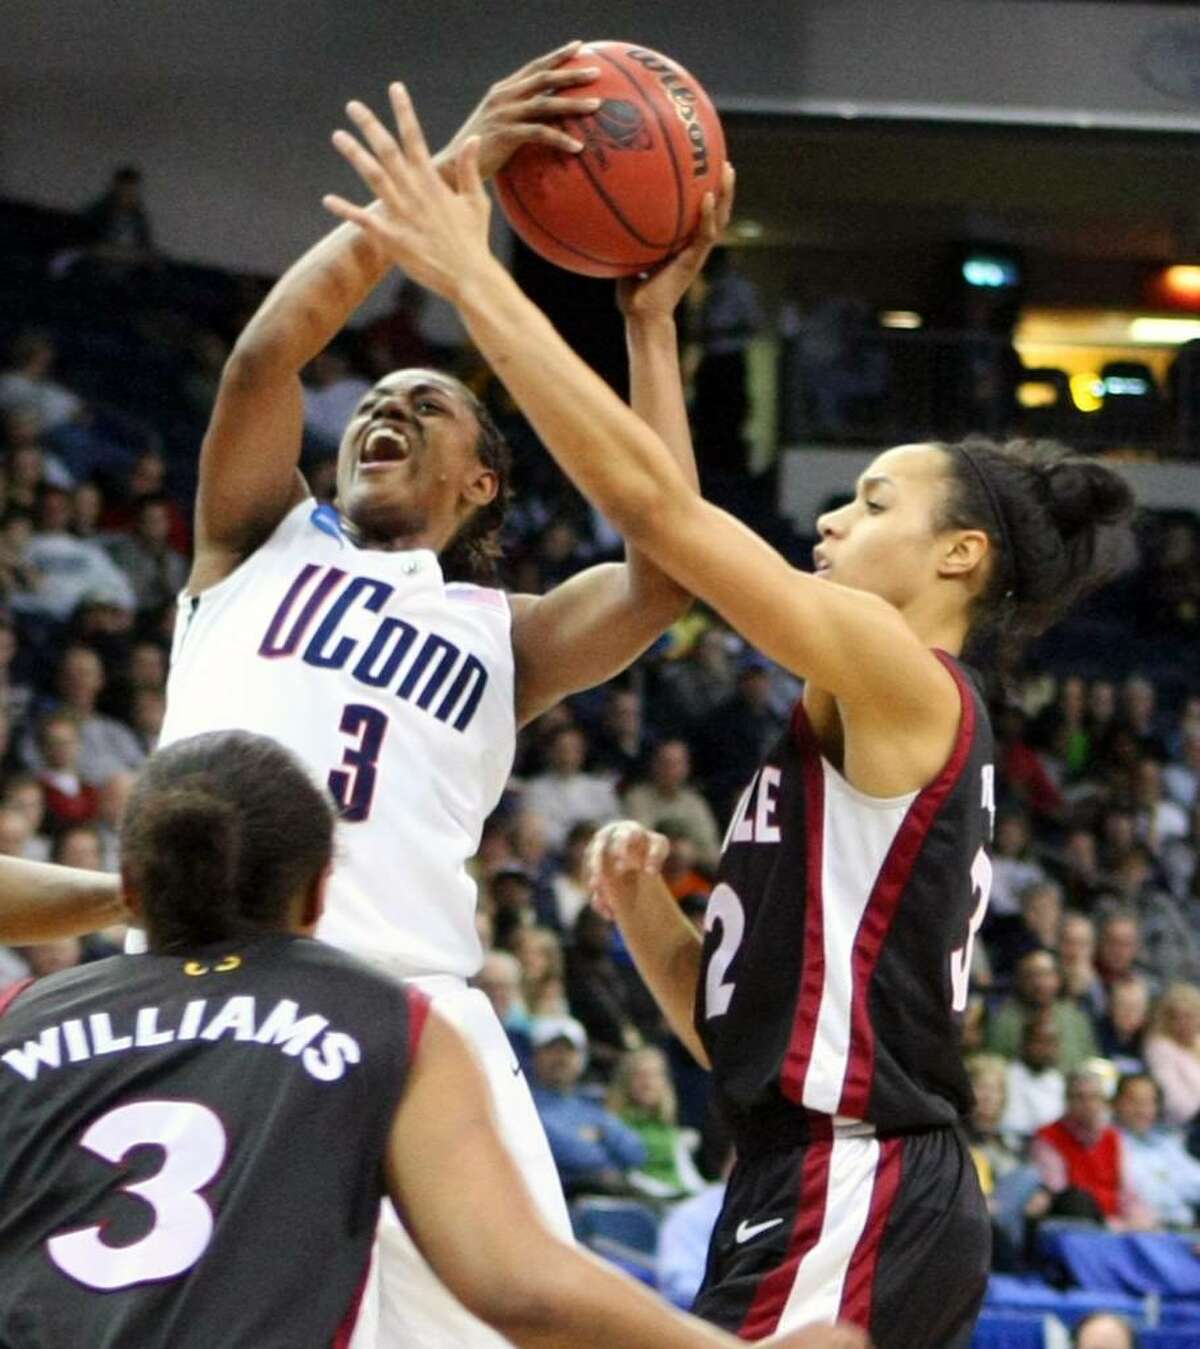 Connecticut's Tiffany Hayes, left, shoots over Temple's Natasha Thames, right and B.J. Williams, left, during the first half of their NCAA college basketball game, Tuesday, March 23, 2010, at the Constant Center in Norfolk, Va. (AP Photo/Jason Hirschfeld)